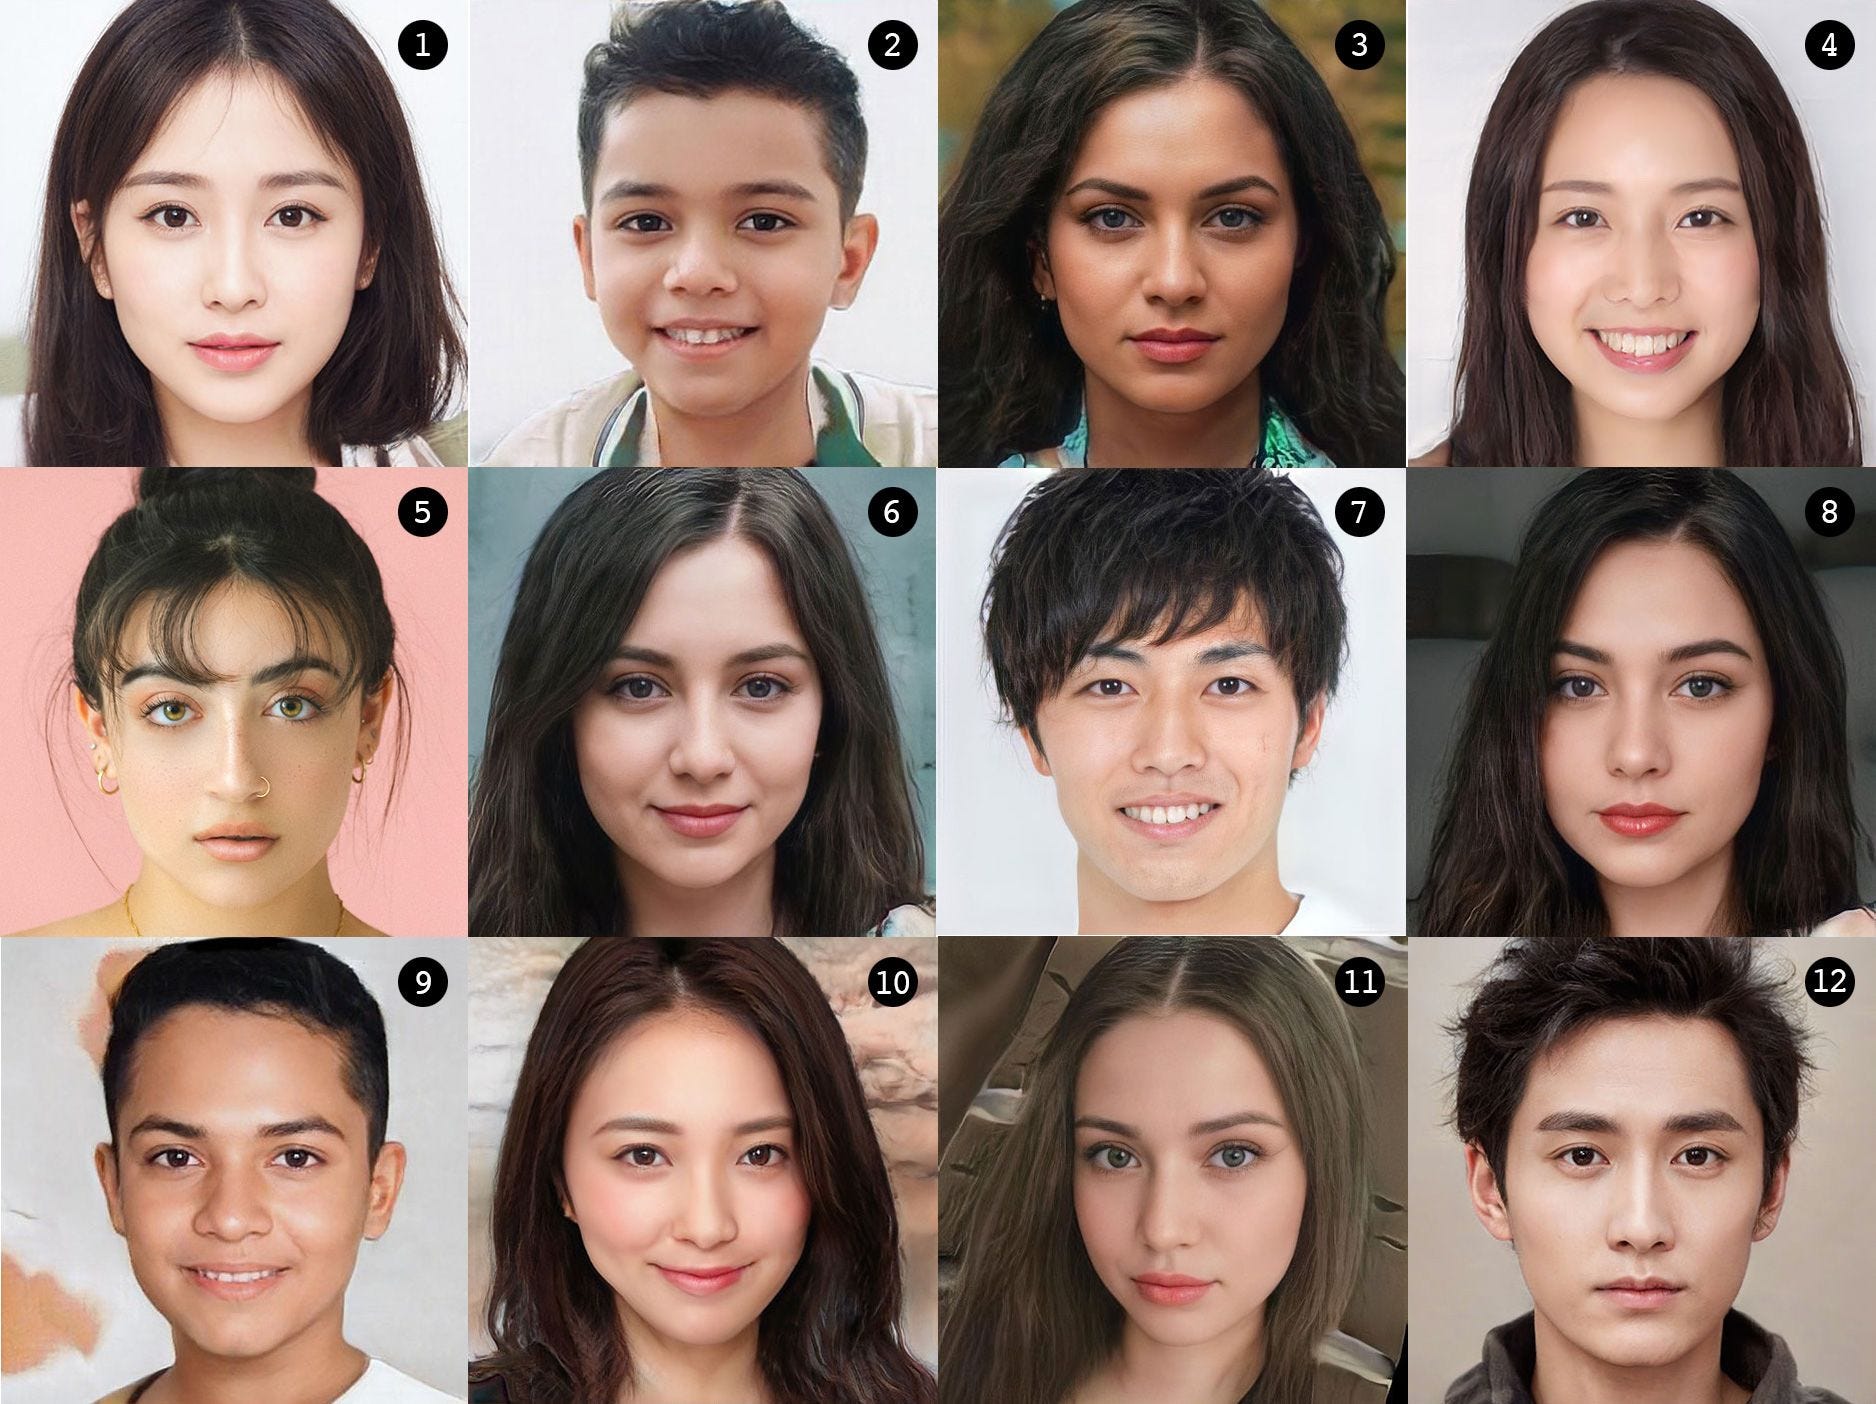 12 faces. 11 are by AI, one is real. Which one?